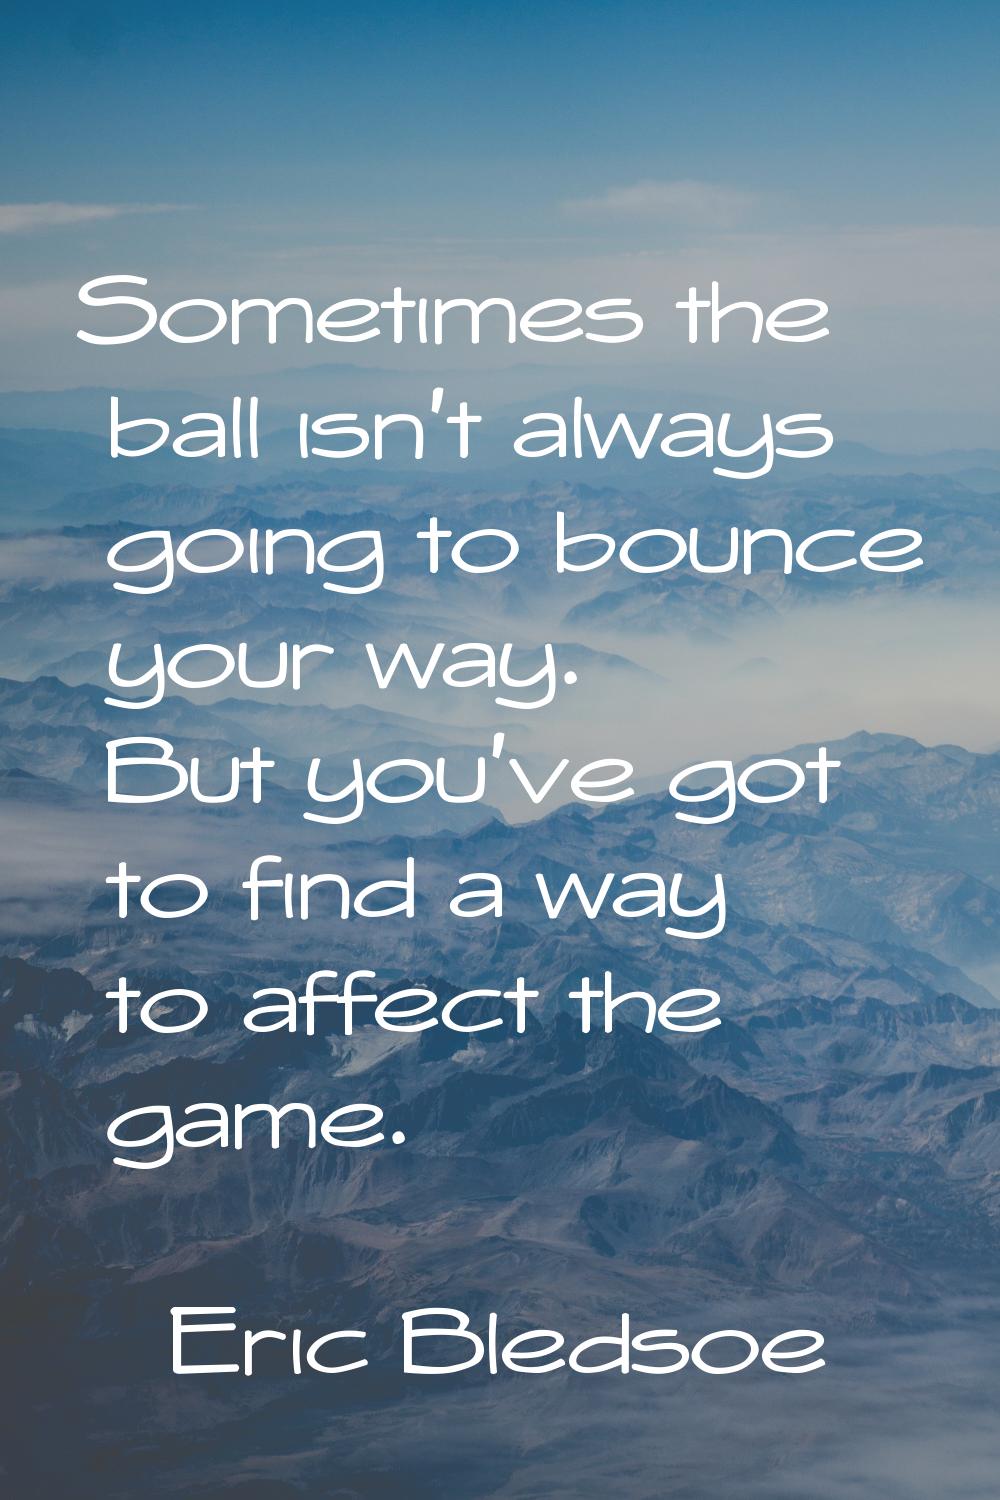 Sometimes the ball isn't always going to bounce your way. But you've got to find a way to affect th